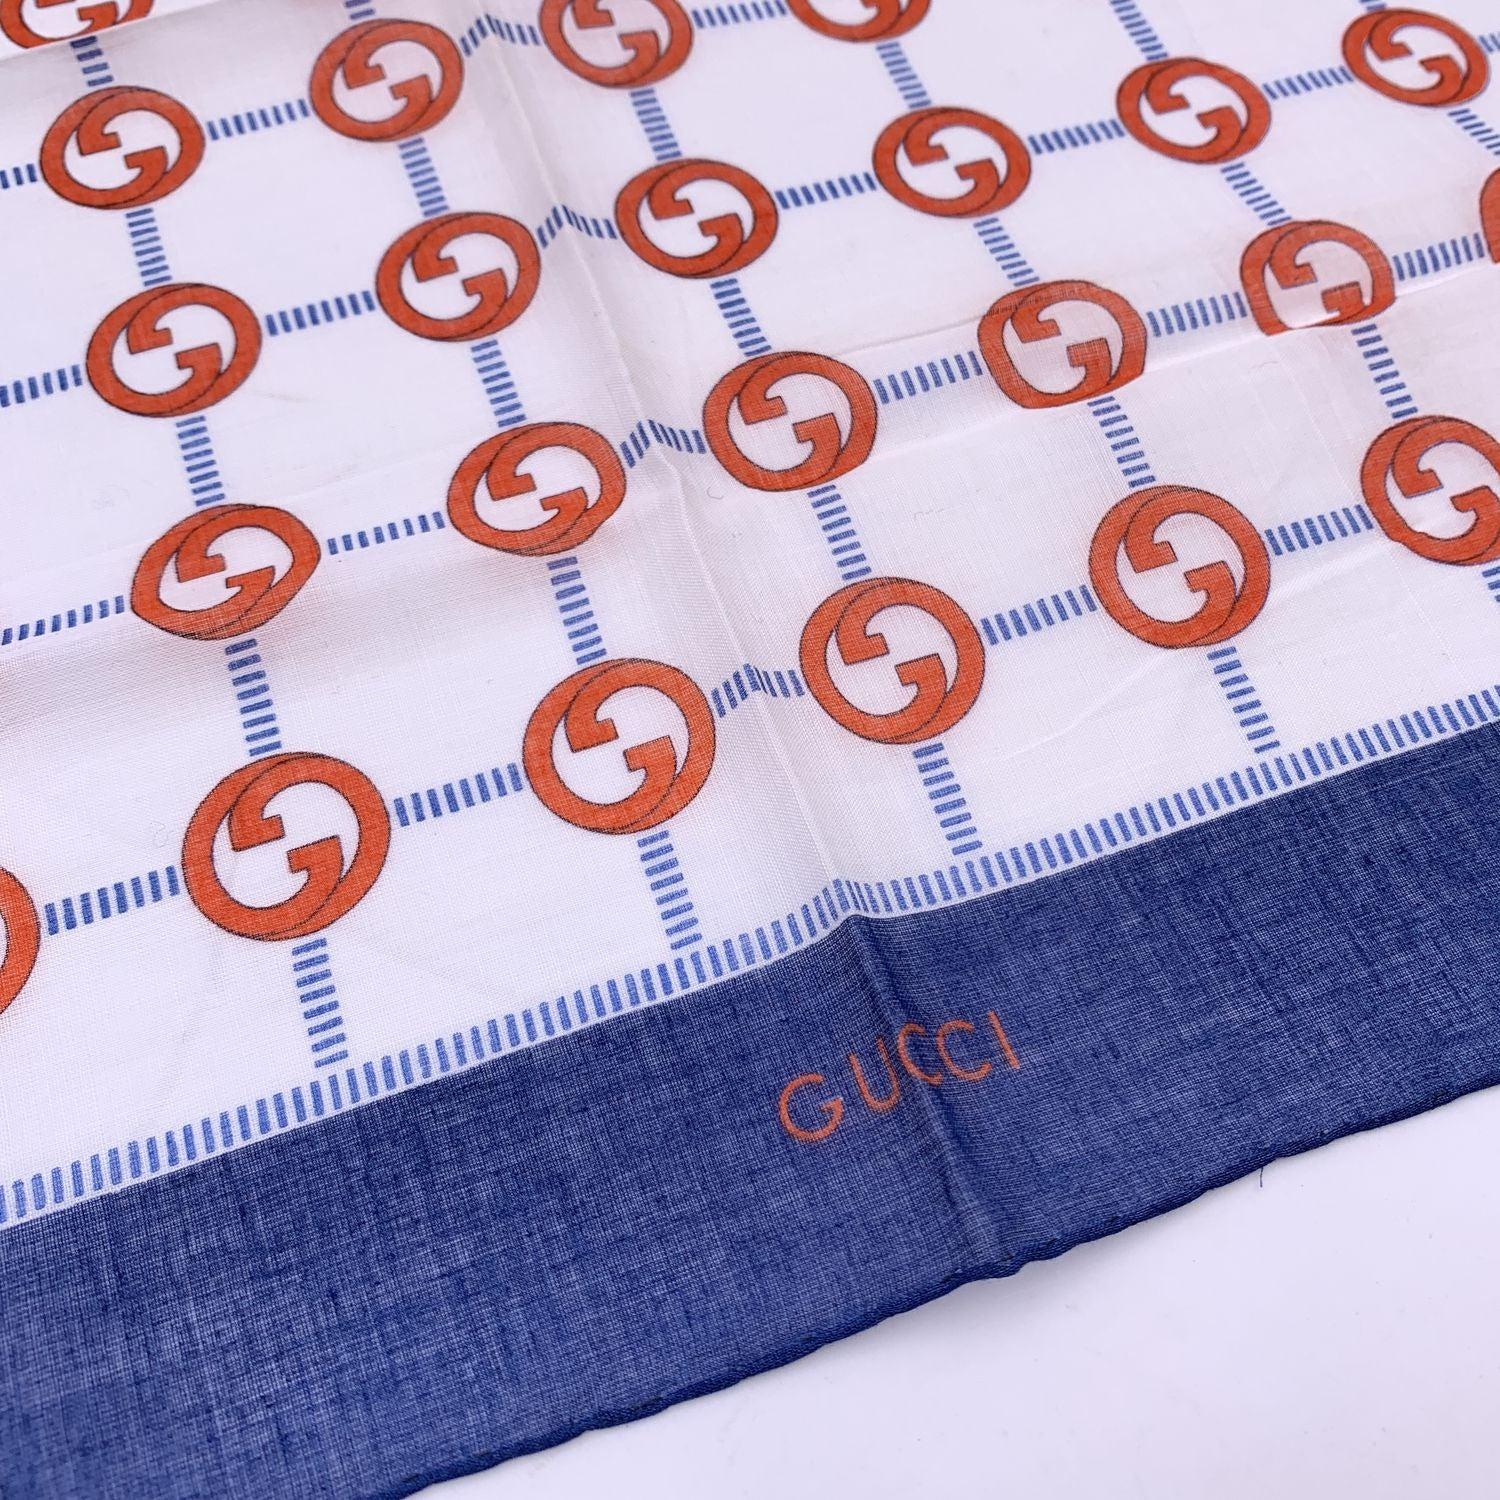 Vintage neck scarf by GUCCI. 100% Cotton. Red/orange GG logo pattern with blue borders. 'Gucci' signature printed on the lower center border. Approx. Measurements: 16.5 x 16.5 inches - 42 x 42 cm Details MATERIAL: Cotton COLOR: Blue MODEL: n.a.